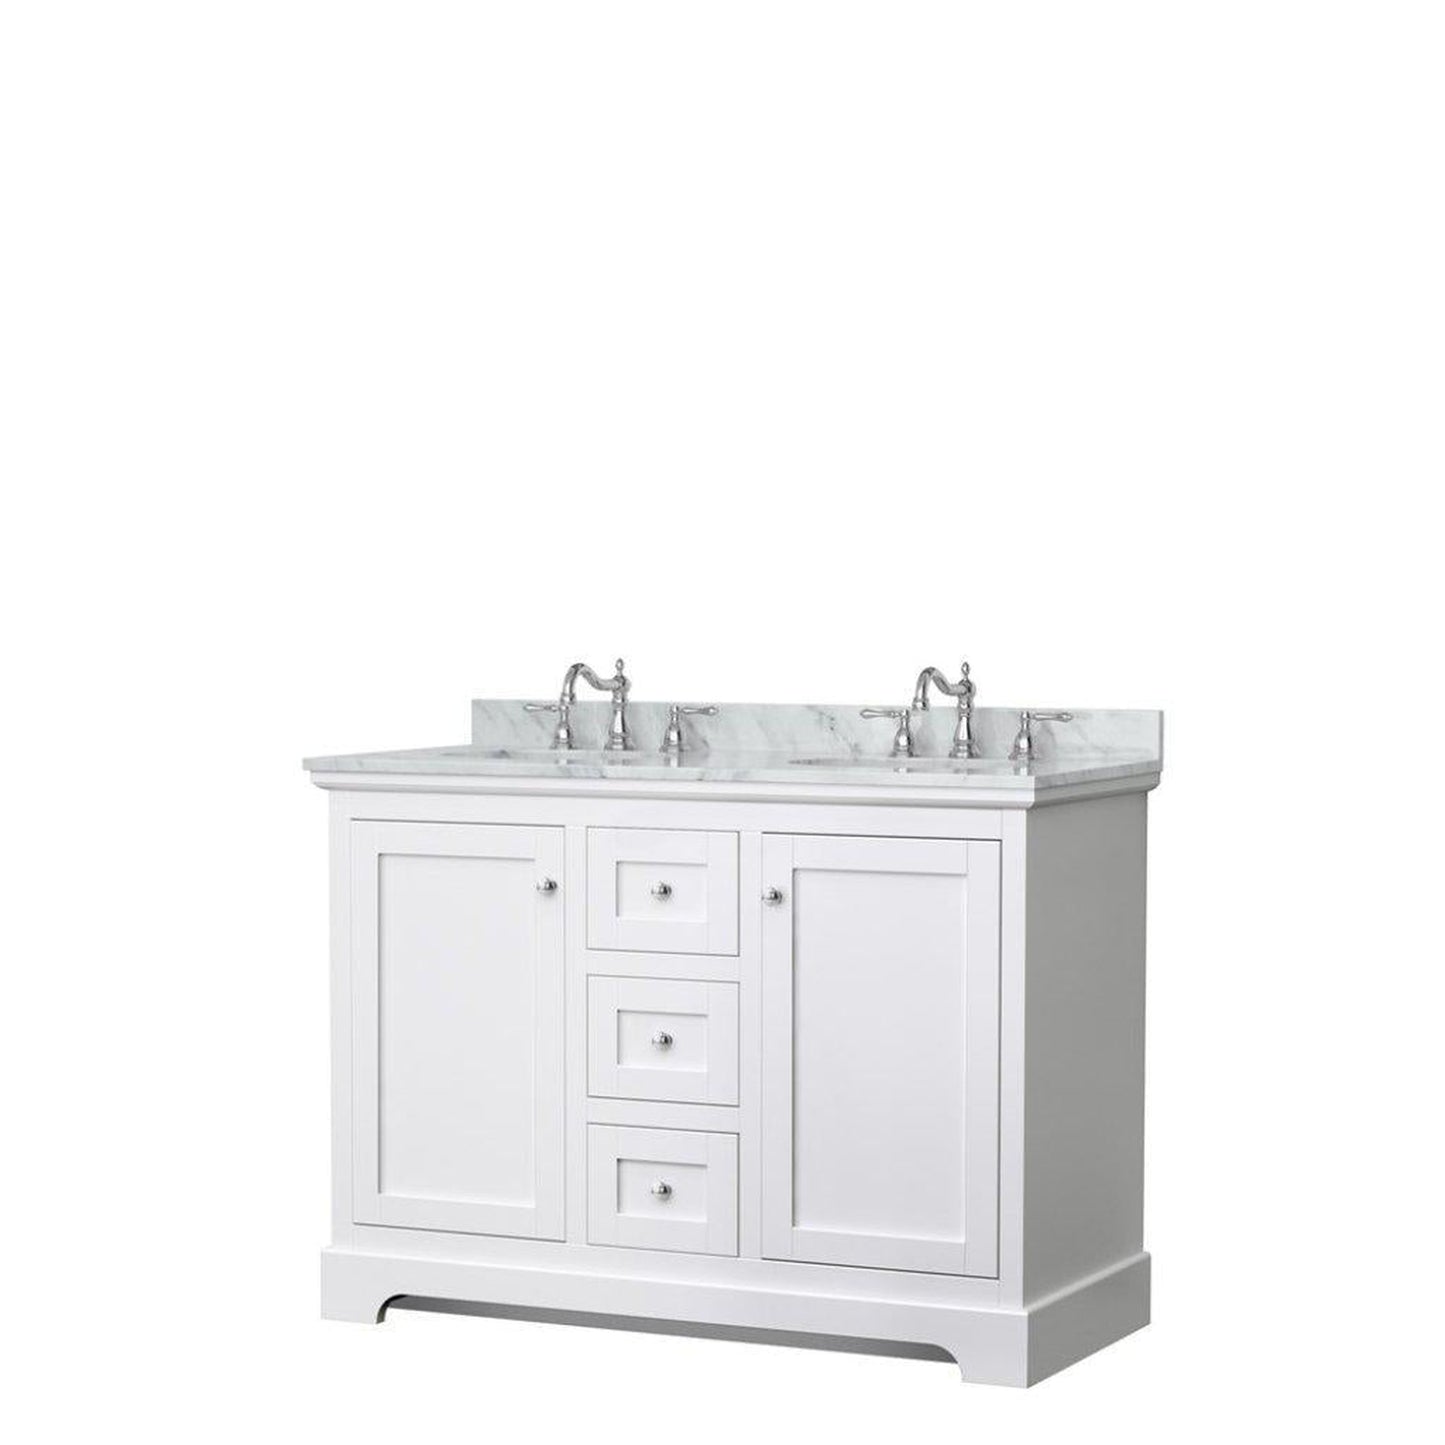 Wyndham Collection Avery 48" White Double Bathroom Vanity, White Carrara Marble Countertop With 3-Hole Faucet, 8" Oval Sink, Polished Chrome Trims